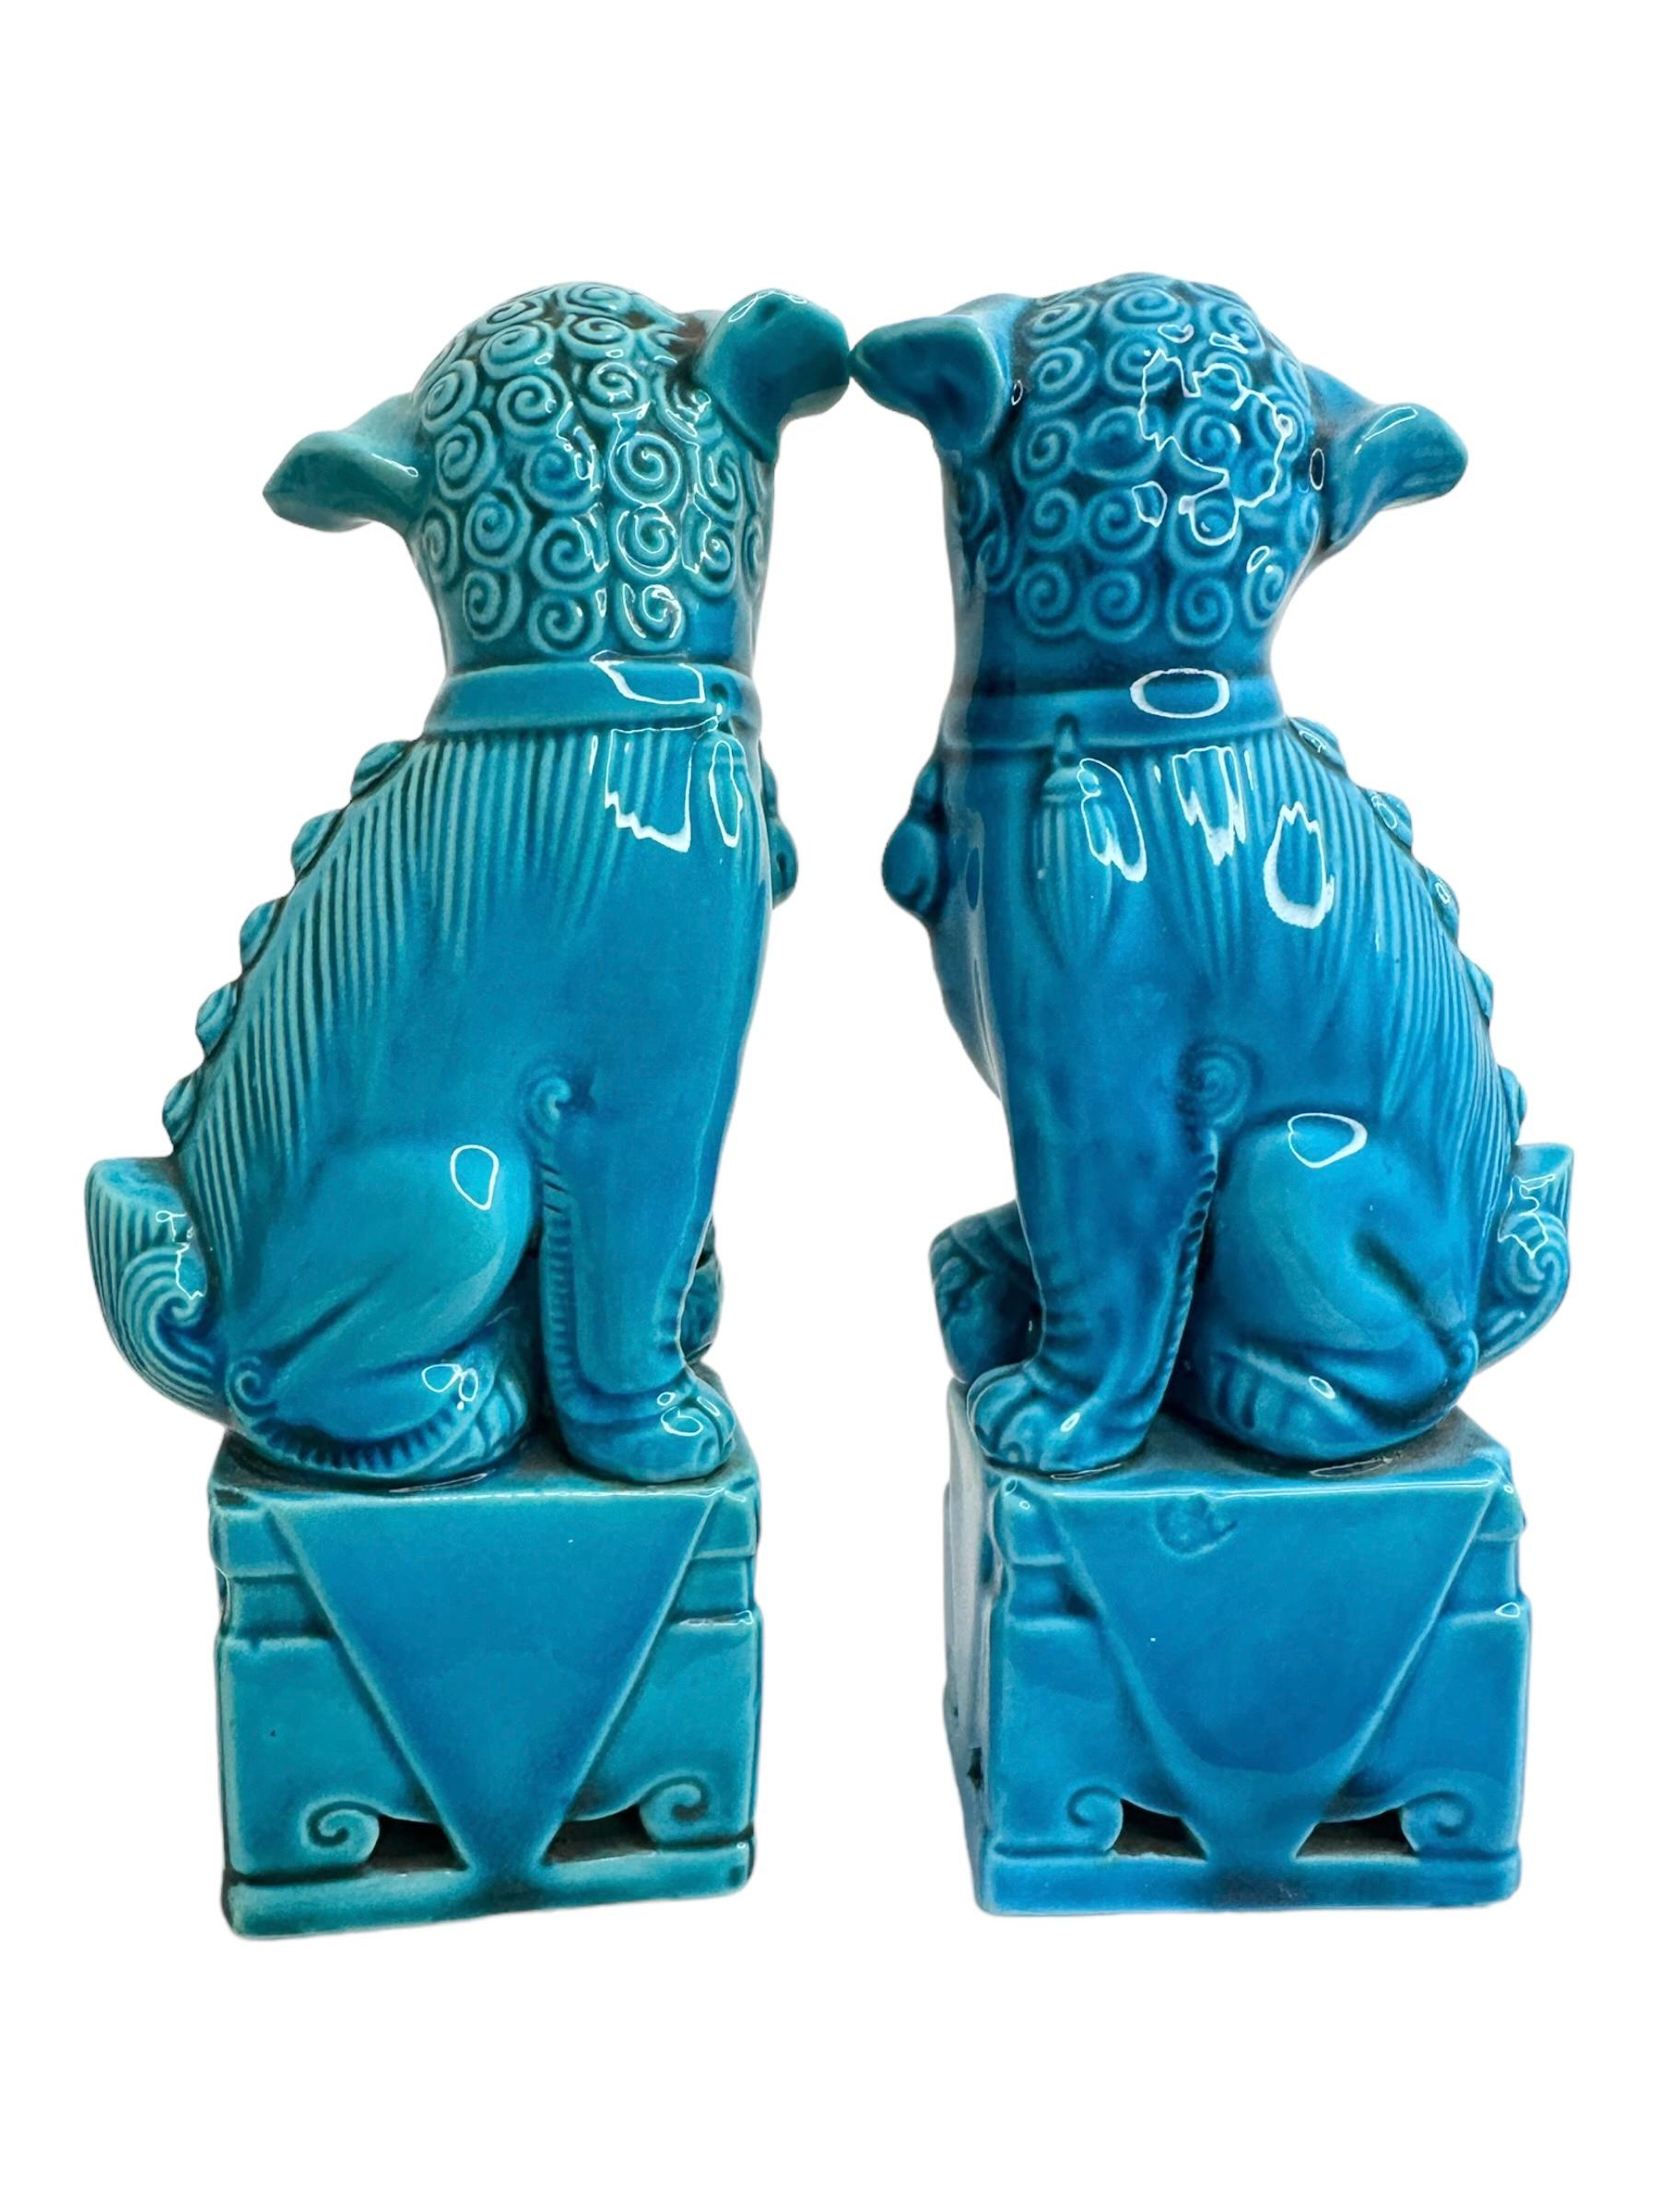 A very nice pair of vintage, turquoise blue, ceramic foo dogs, circa 1980s. Excellent condition and patina; makes a fun decor item in any room! Found at an estate sale in Vienna, Austria.